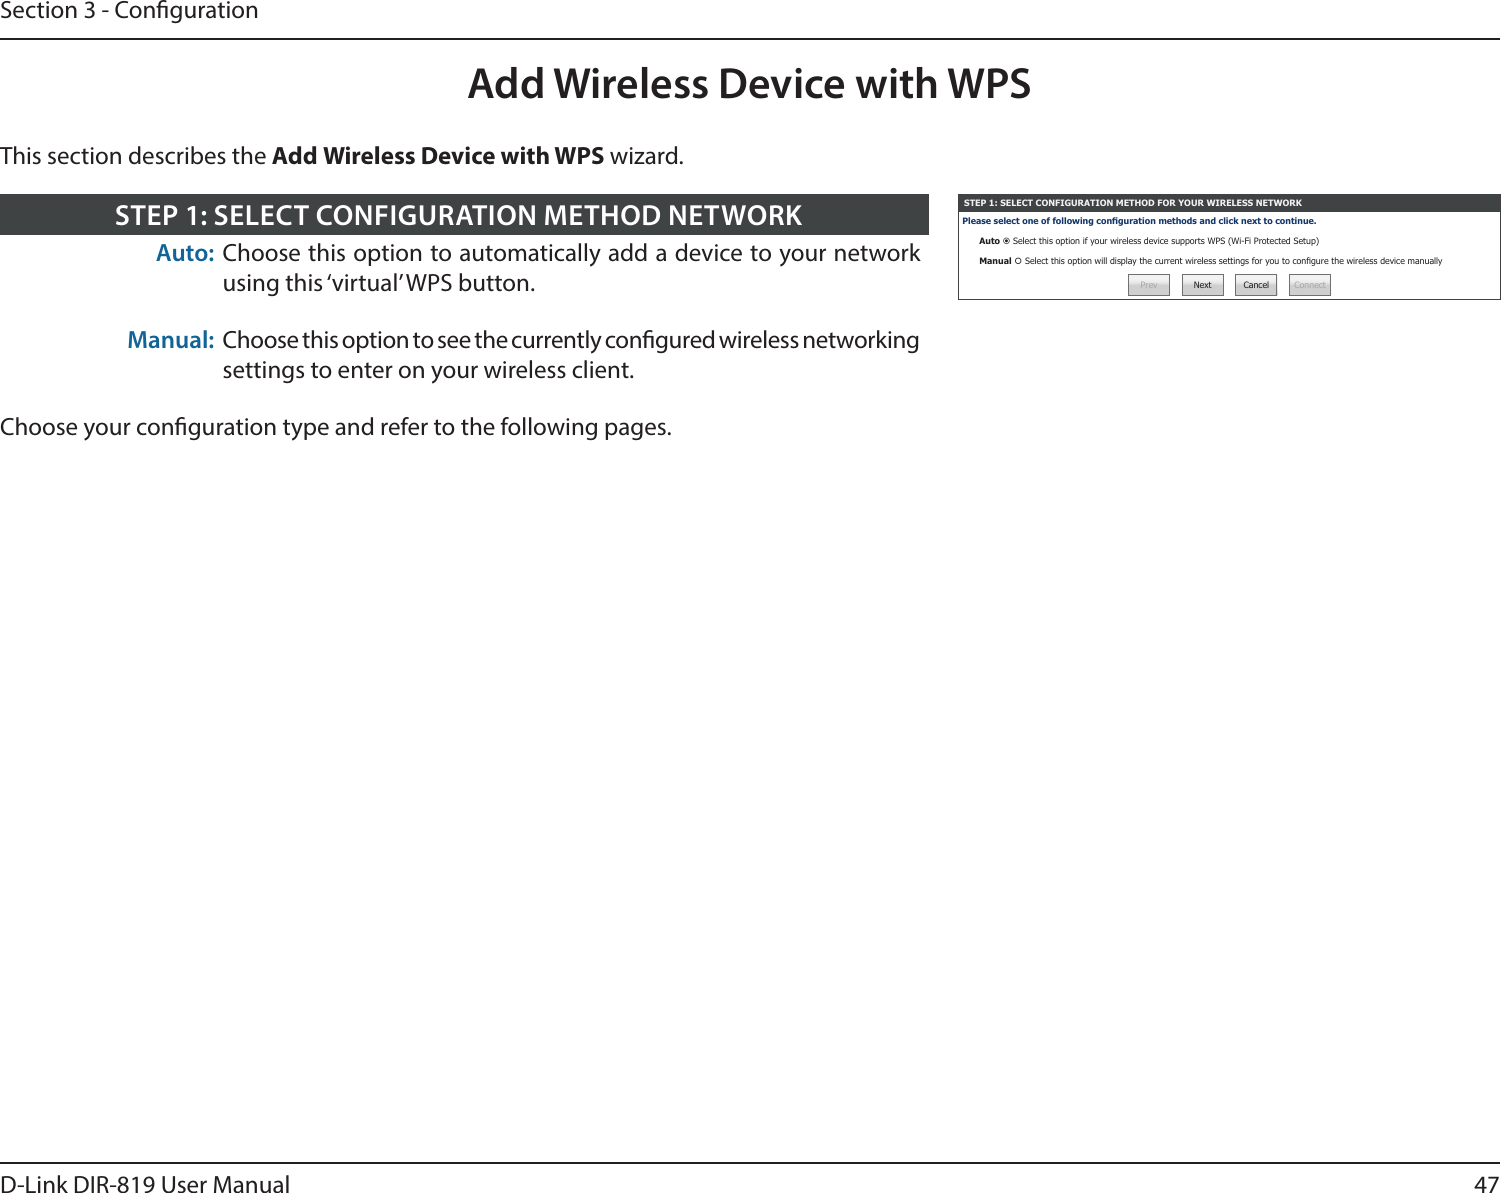 47D-Link DIR-819 User ManualSection 3 - CongurationAdd Wireless Device with WPSSTEP 1: SELECT CONFIGURATION METHOD FOR YOUR WIRELESS NETWORKPlease select one of following conguration methods and click next to continue.Auto  Select this option if your wireless device supports WPS (Wi-Fi Protected Setup)Manual  Select this option will display the current wireless settings for you to congure the wireless device manuallyPrev Next Cancel ConnectAuto: Choose this option to automatically add a device to your network using this ‘virtual’ WPS button.Manual: Choose this option to see the currently congured wireless networking settings to enter on your wireless client.Choose your conguration type and refer to the following pages.STEP 1: SELECT CONFIGURATION METHOD NETWORKThis section describes the Add Wireless Device with WPS wizard.